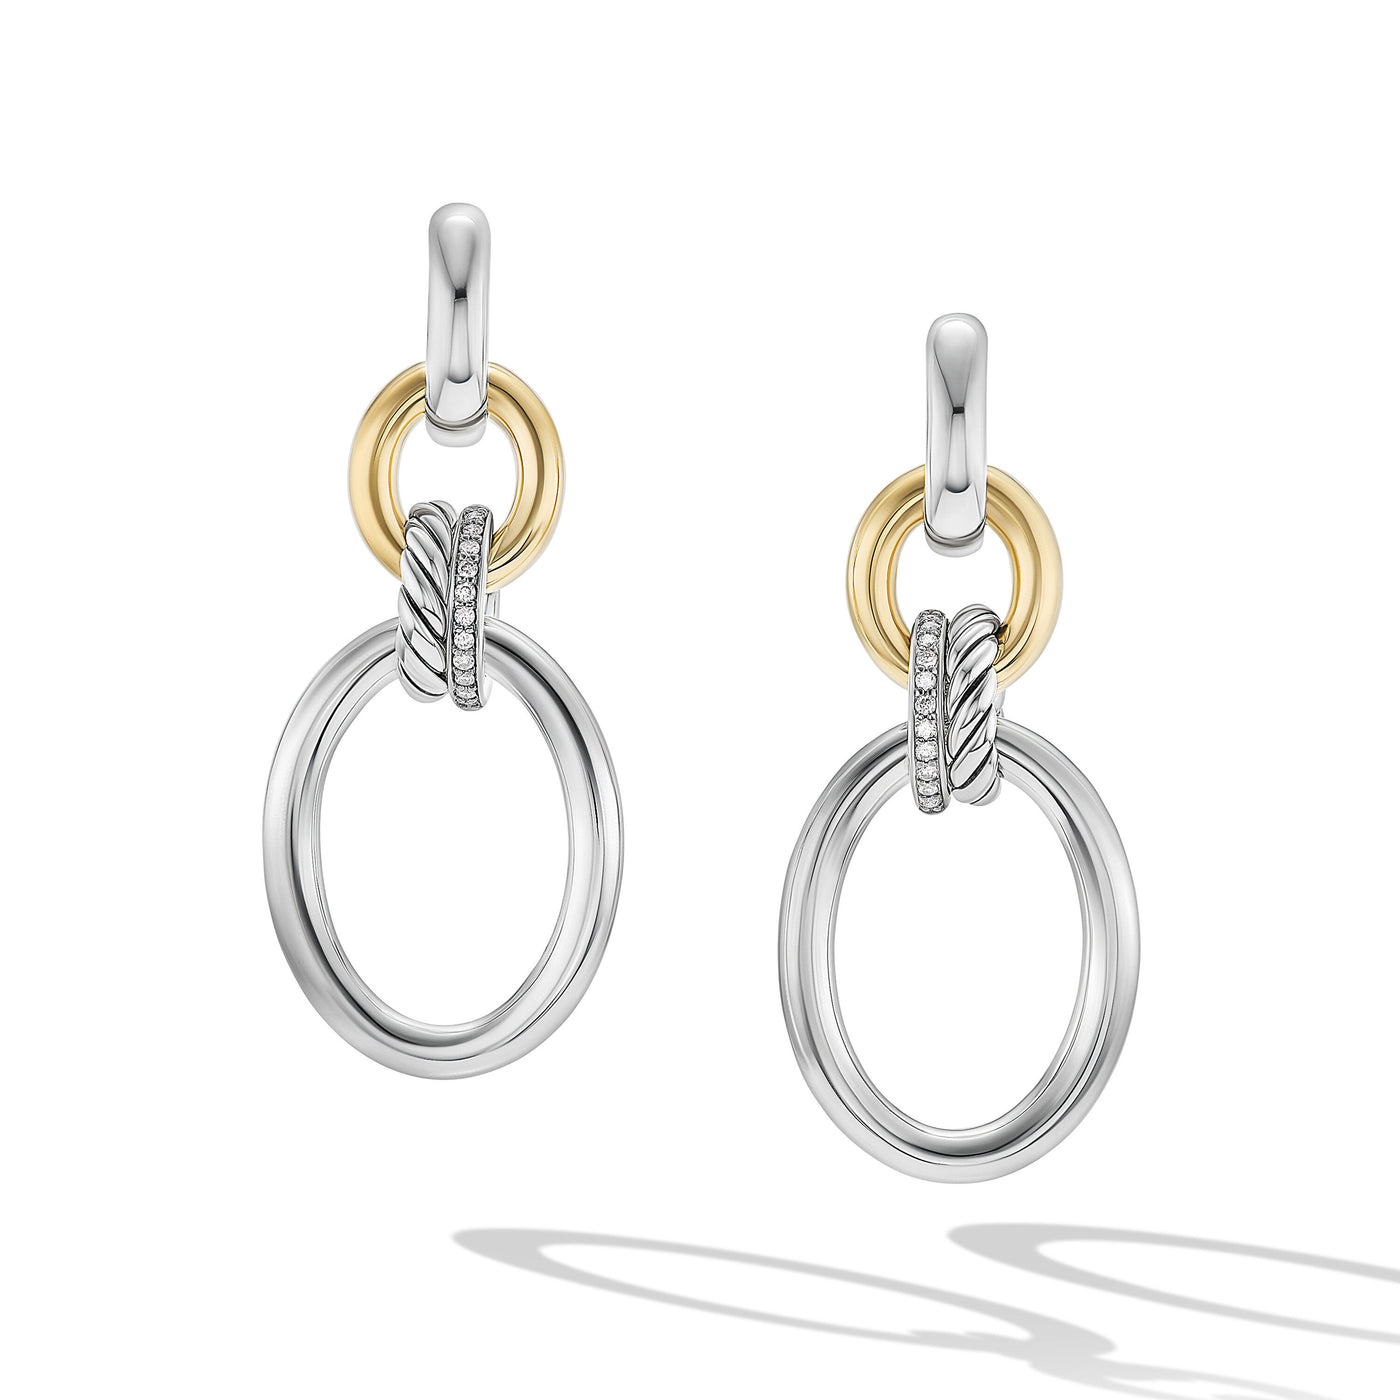 DY Mercer? Circular Drop Earrings in Sterling Silver with 18K Yellow Gold and Diamonds, 50mm